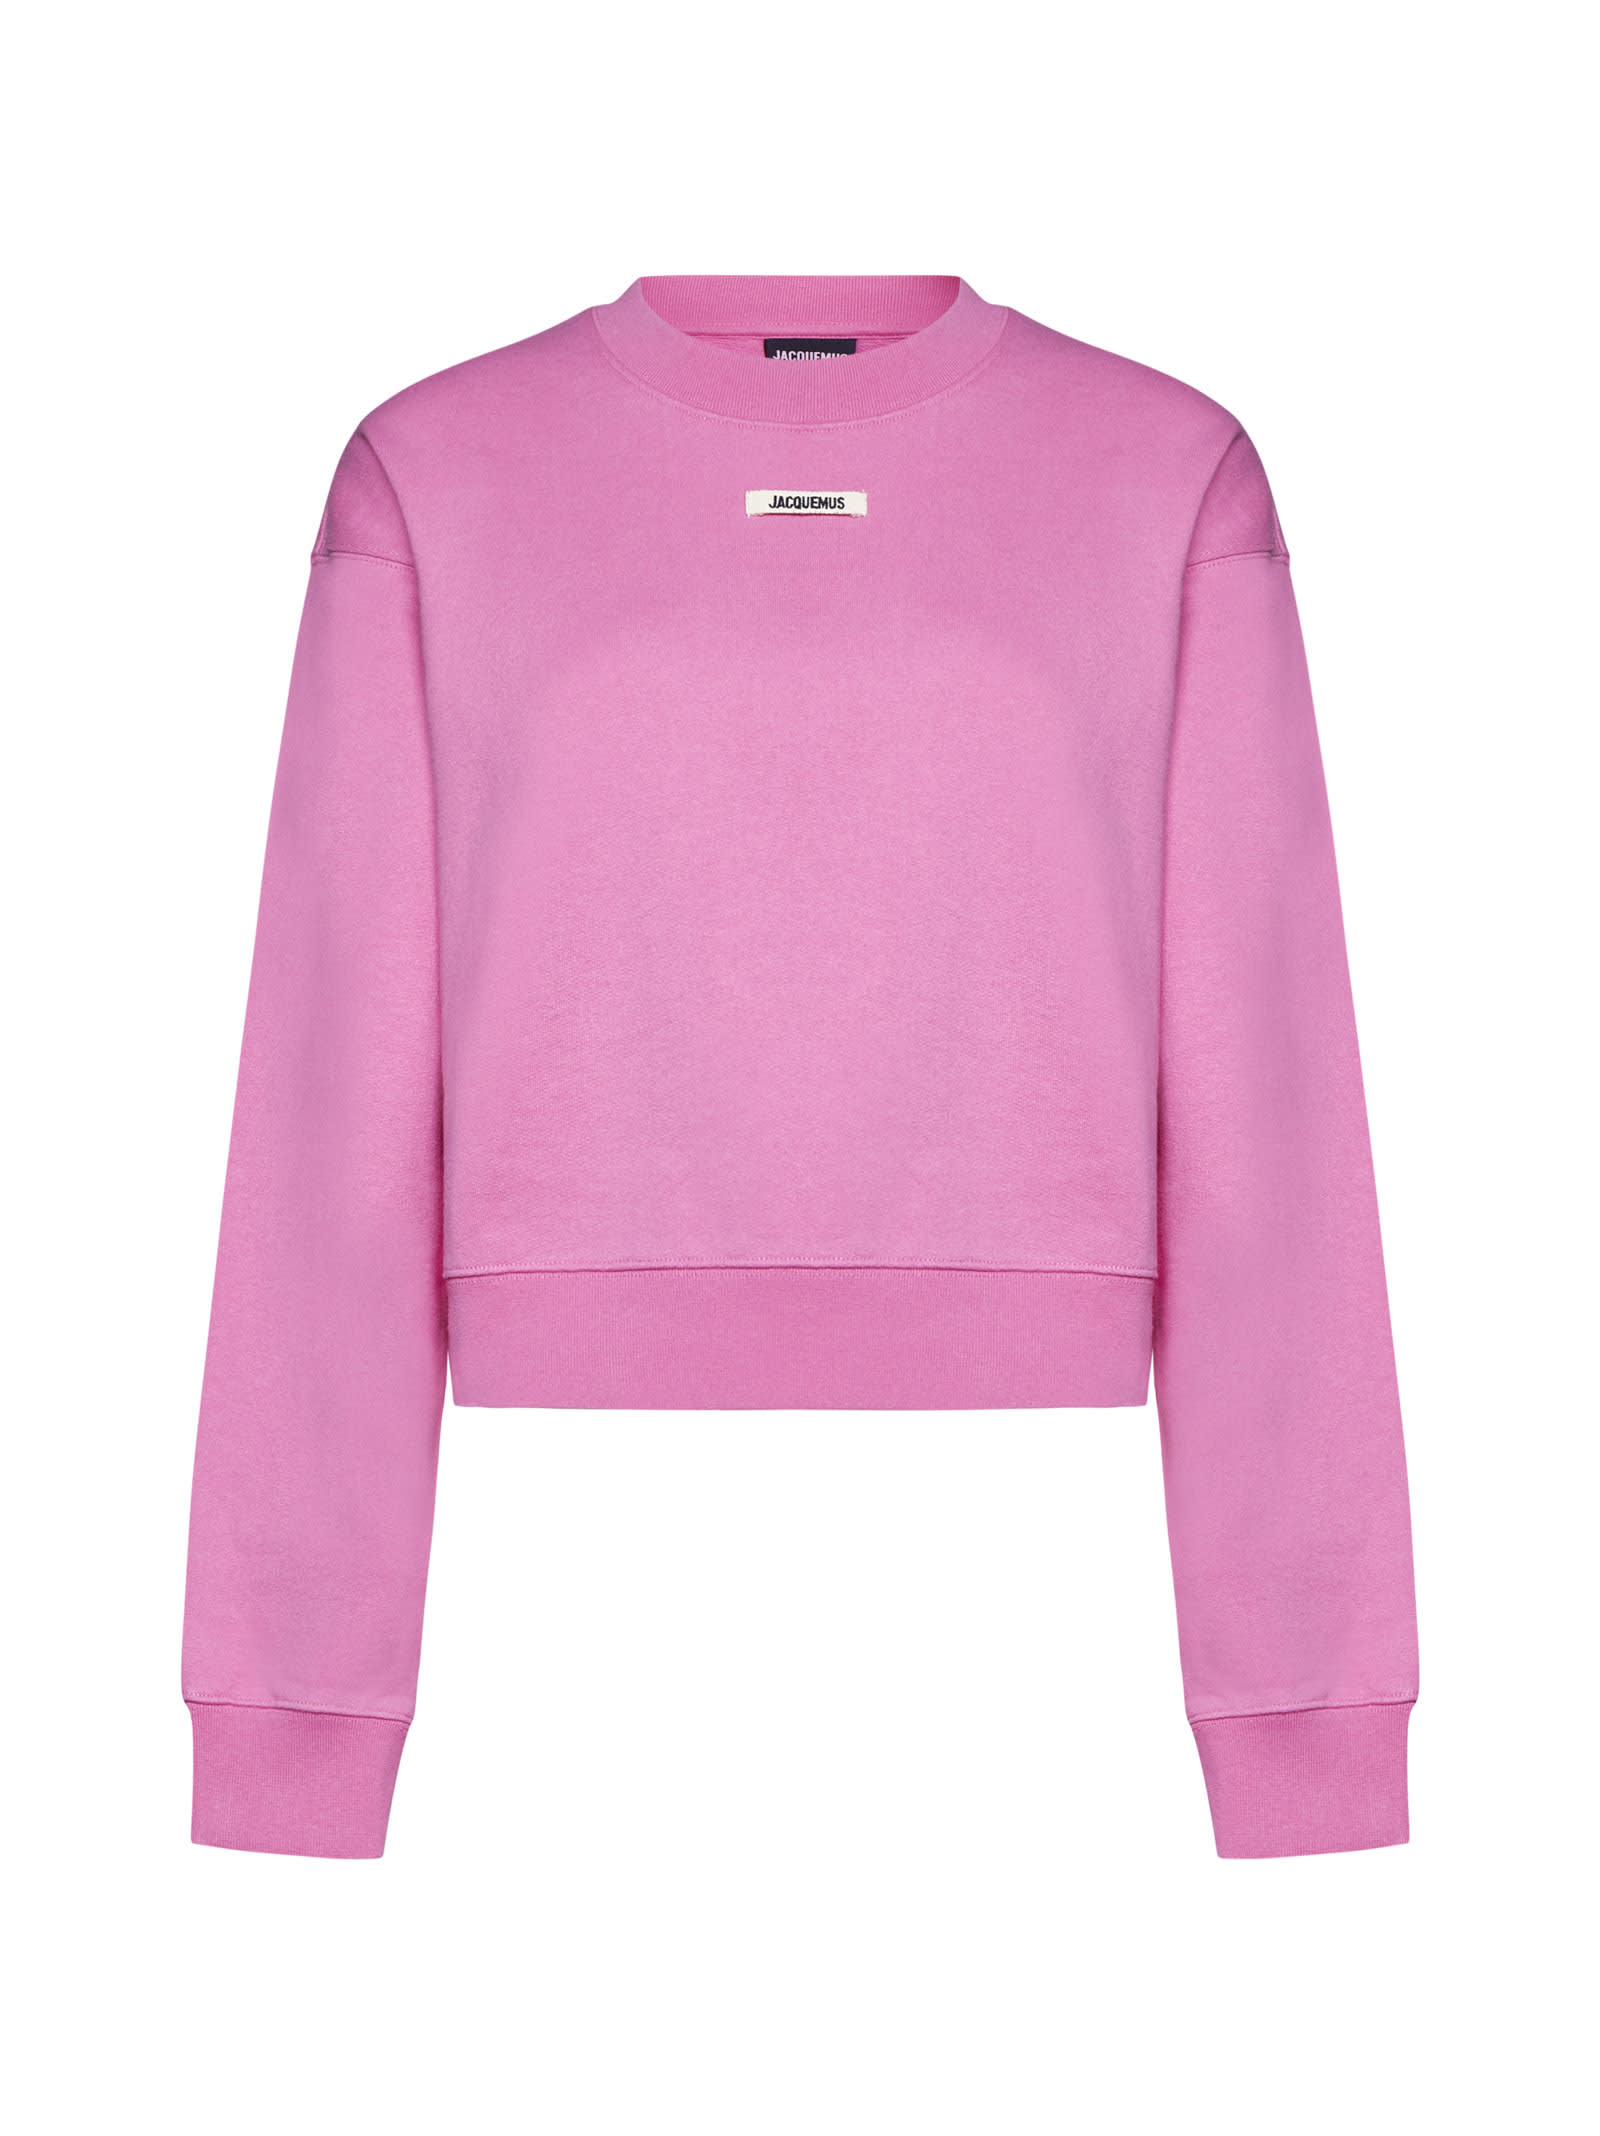 Jacquemus Sweater In Pink